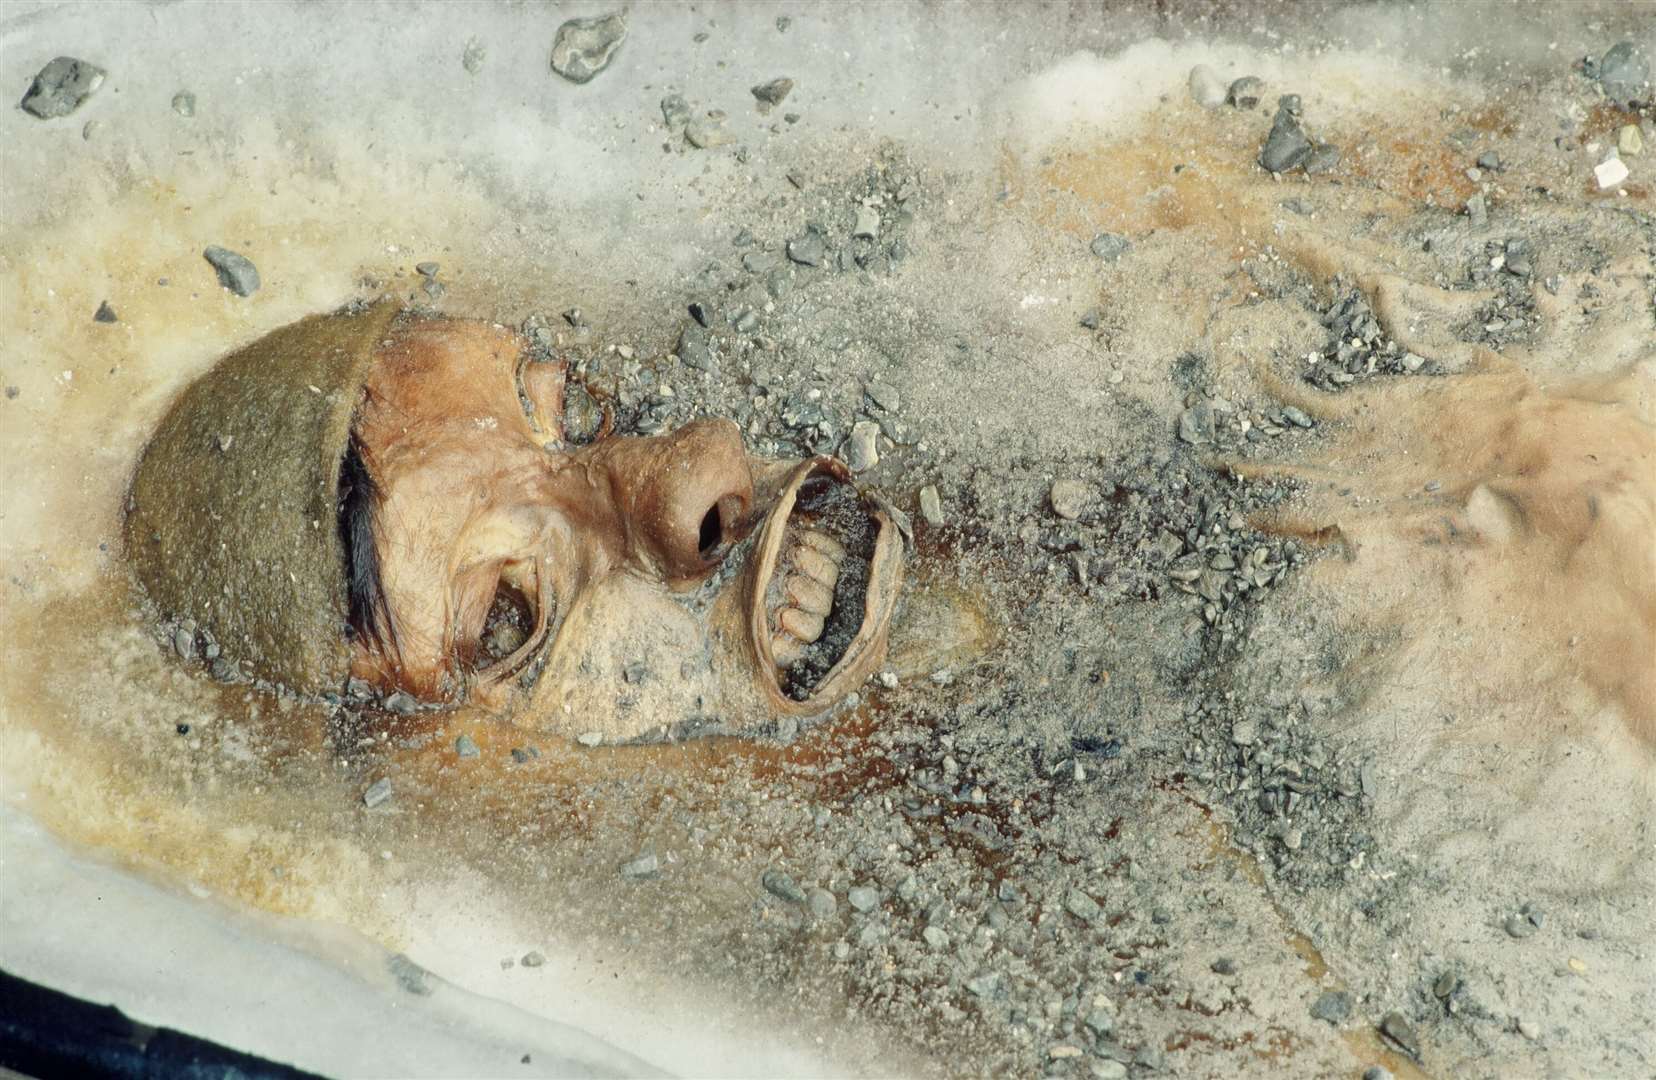 Pefectly preserved in the ice, John's face still has recognisable features. Picture: Brian Spenceley